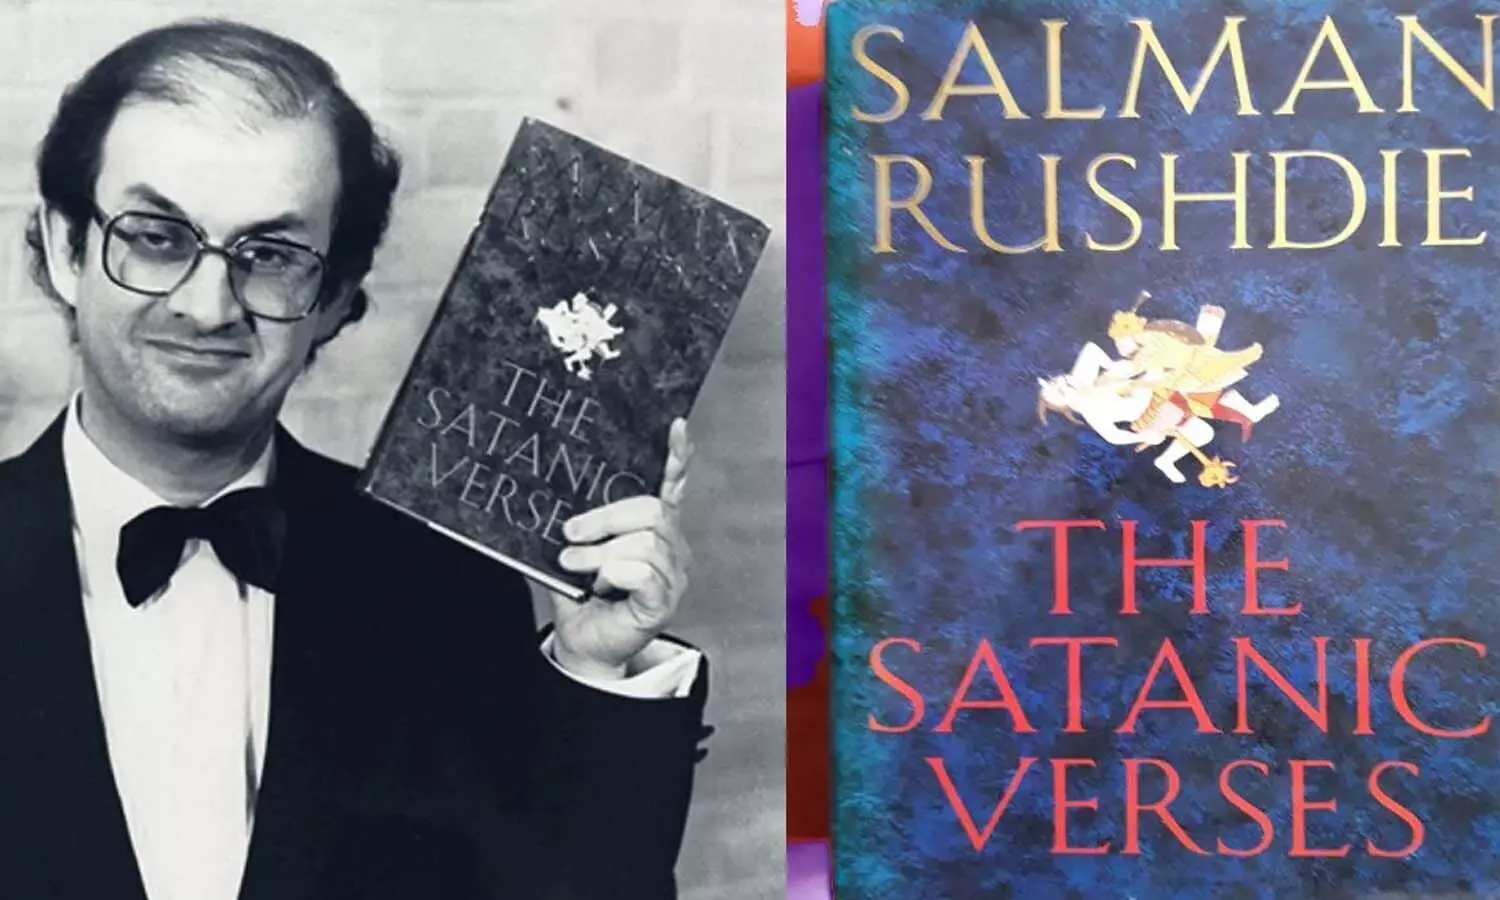 Not only Salman Rushdie, the book of these authors has also been controversial